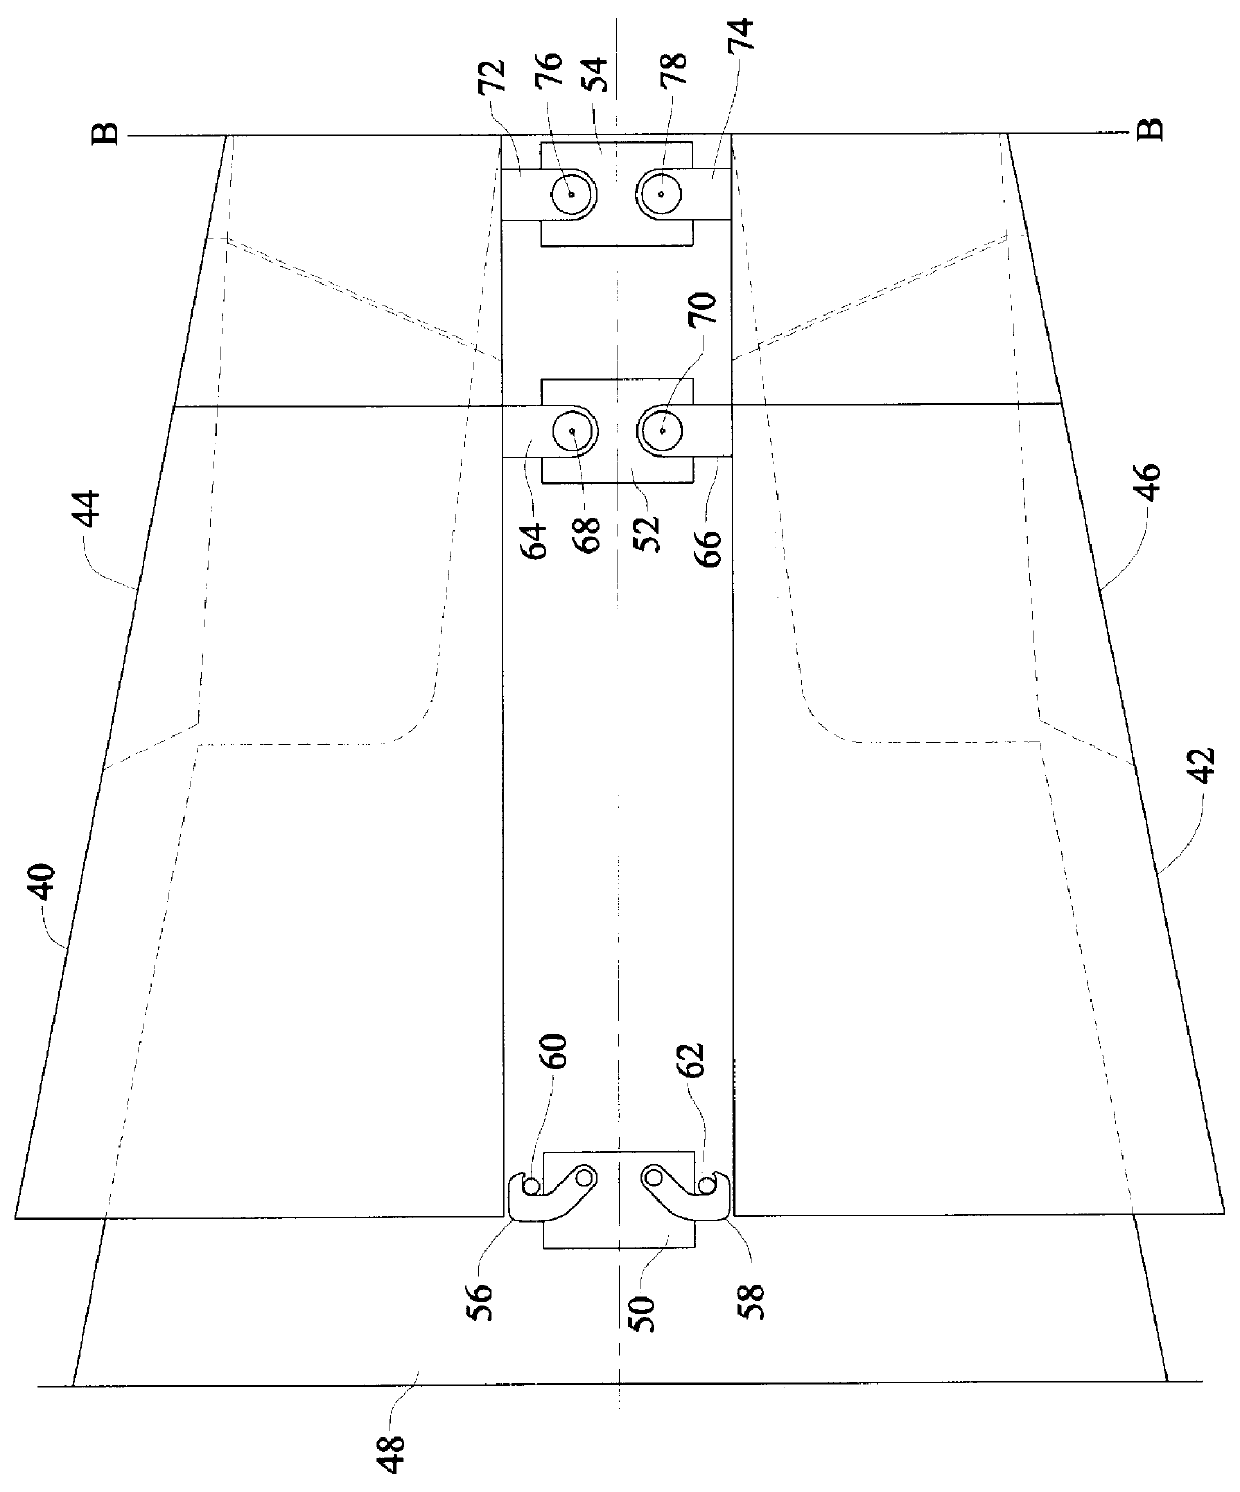 Thrust reverser with throat trimming capability